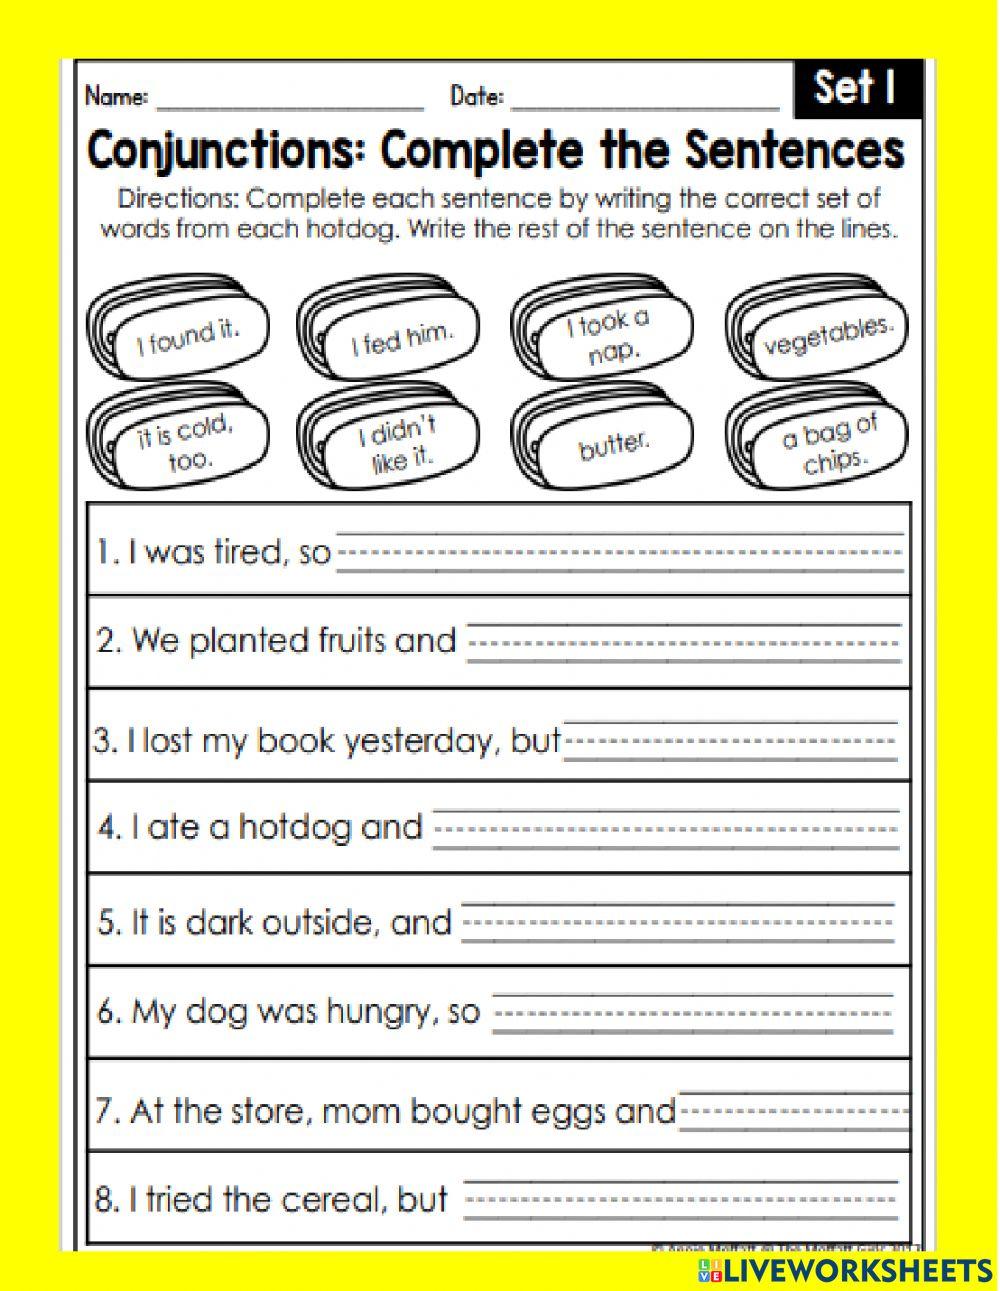 Year 1 - Conjunctions